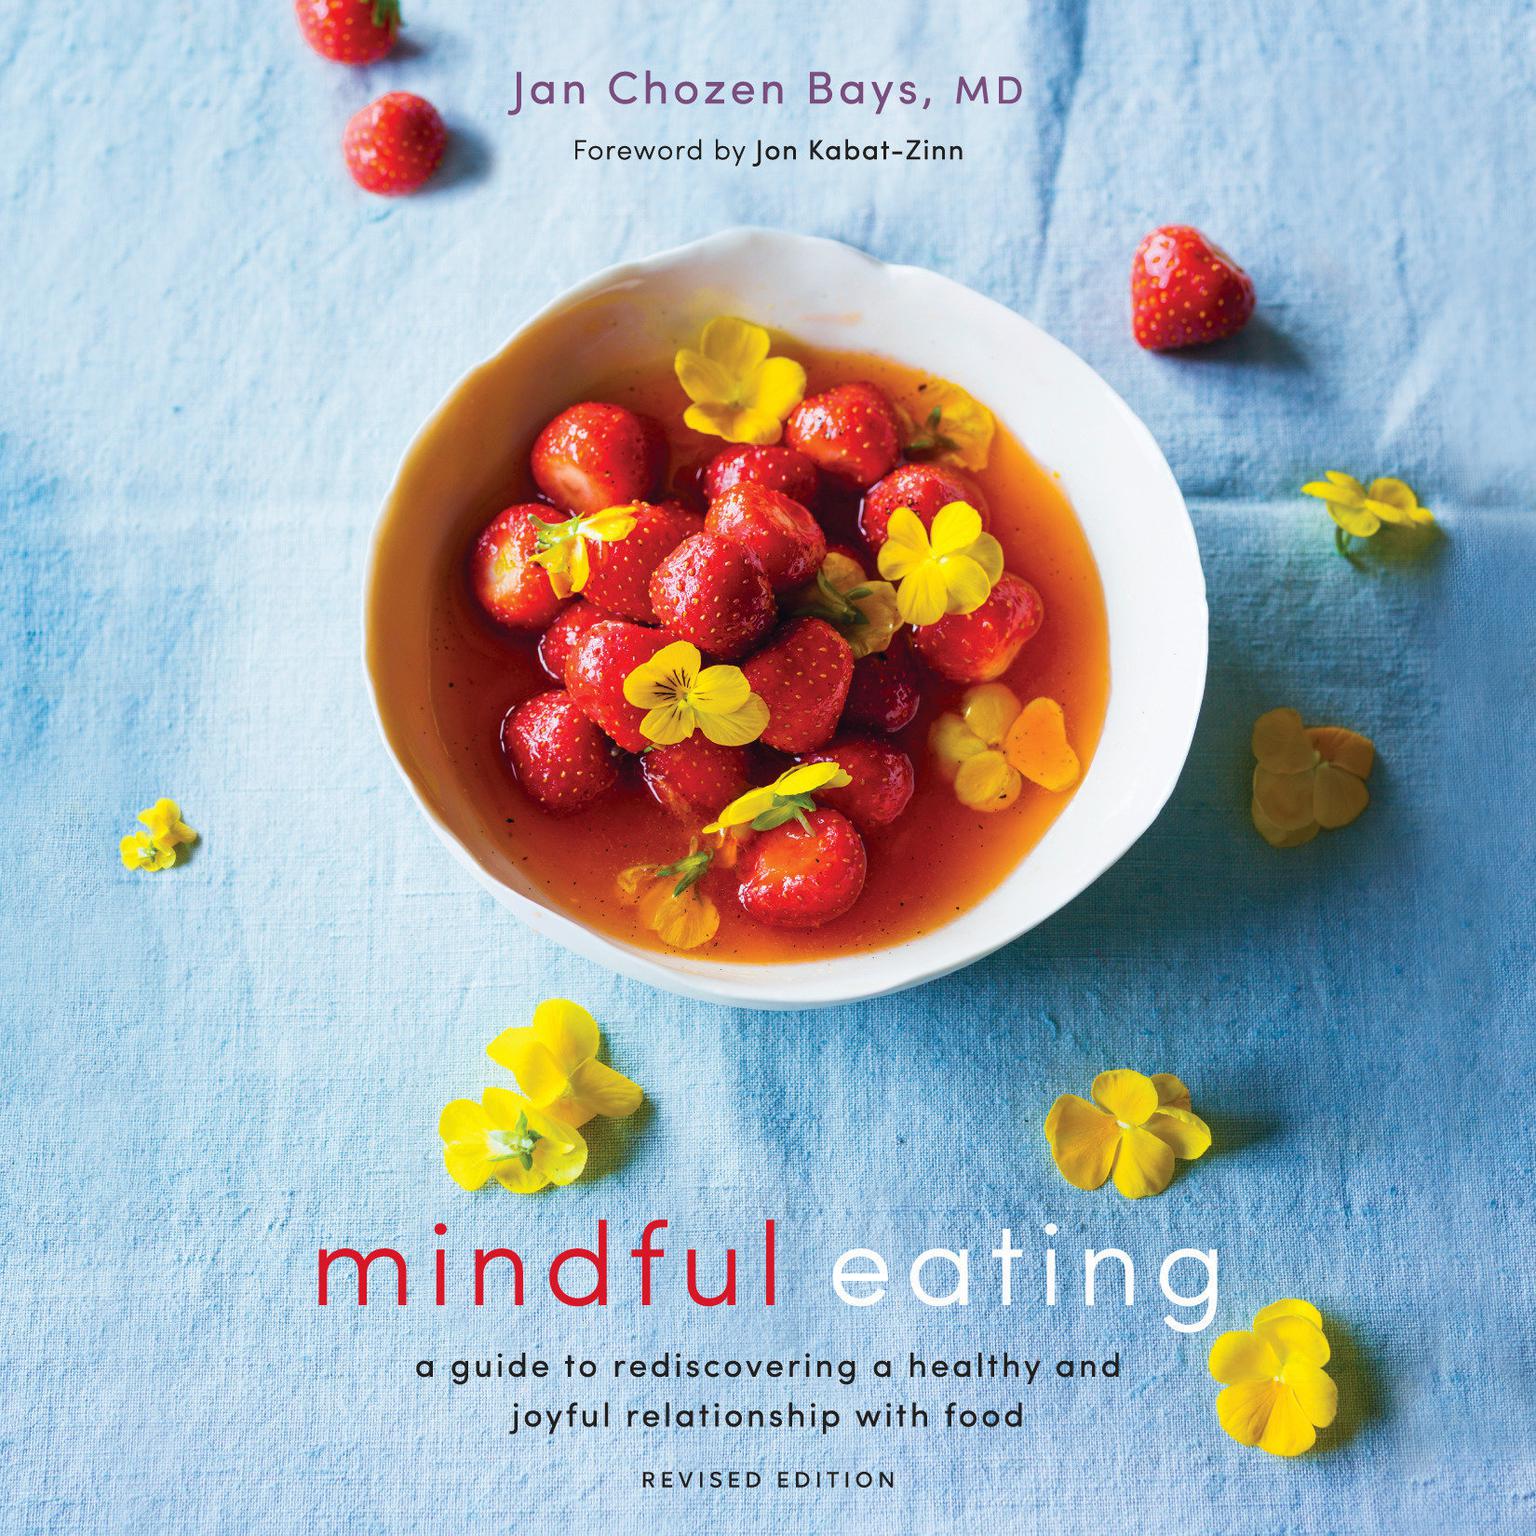 Mindful Eating: A Guide to Rediscovering a Healthy and Joyful Relationship with Food Audiobook, by Jan Chozen Bays